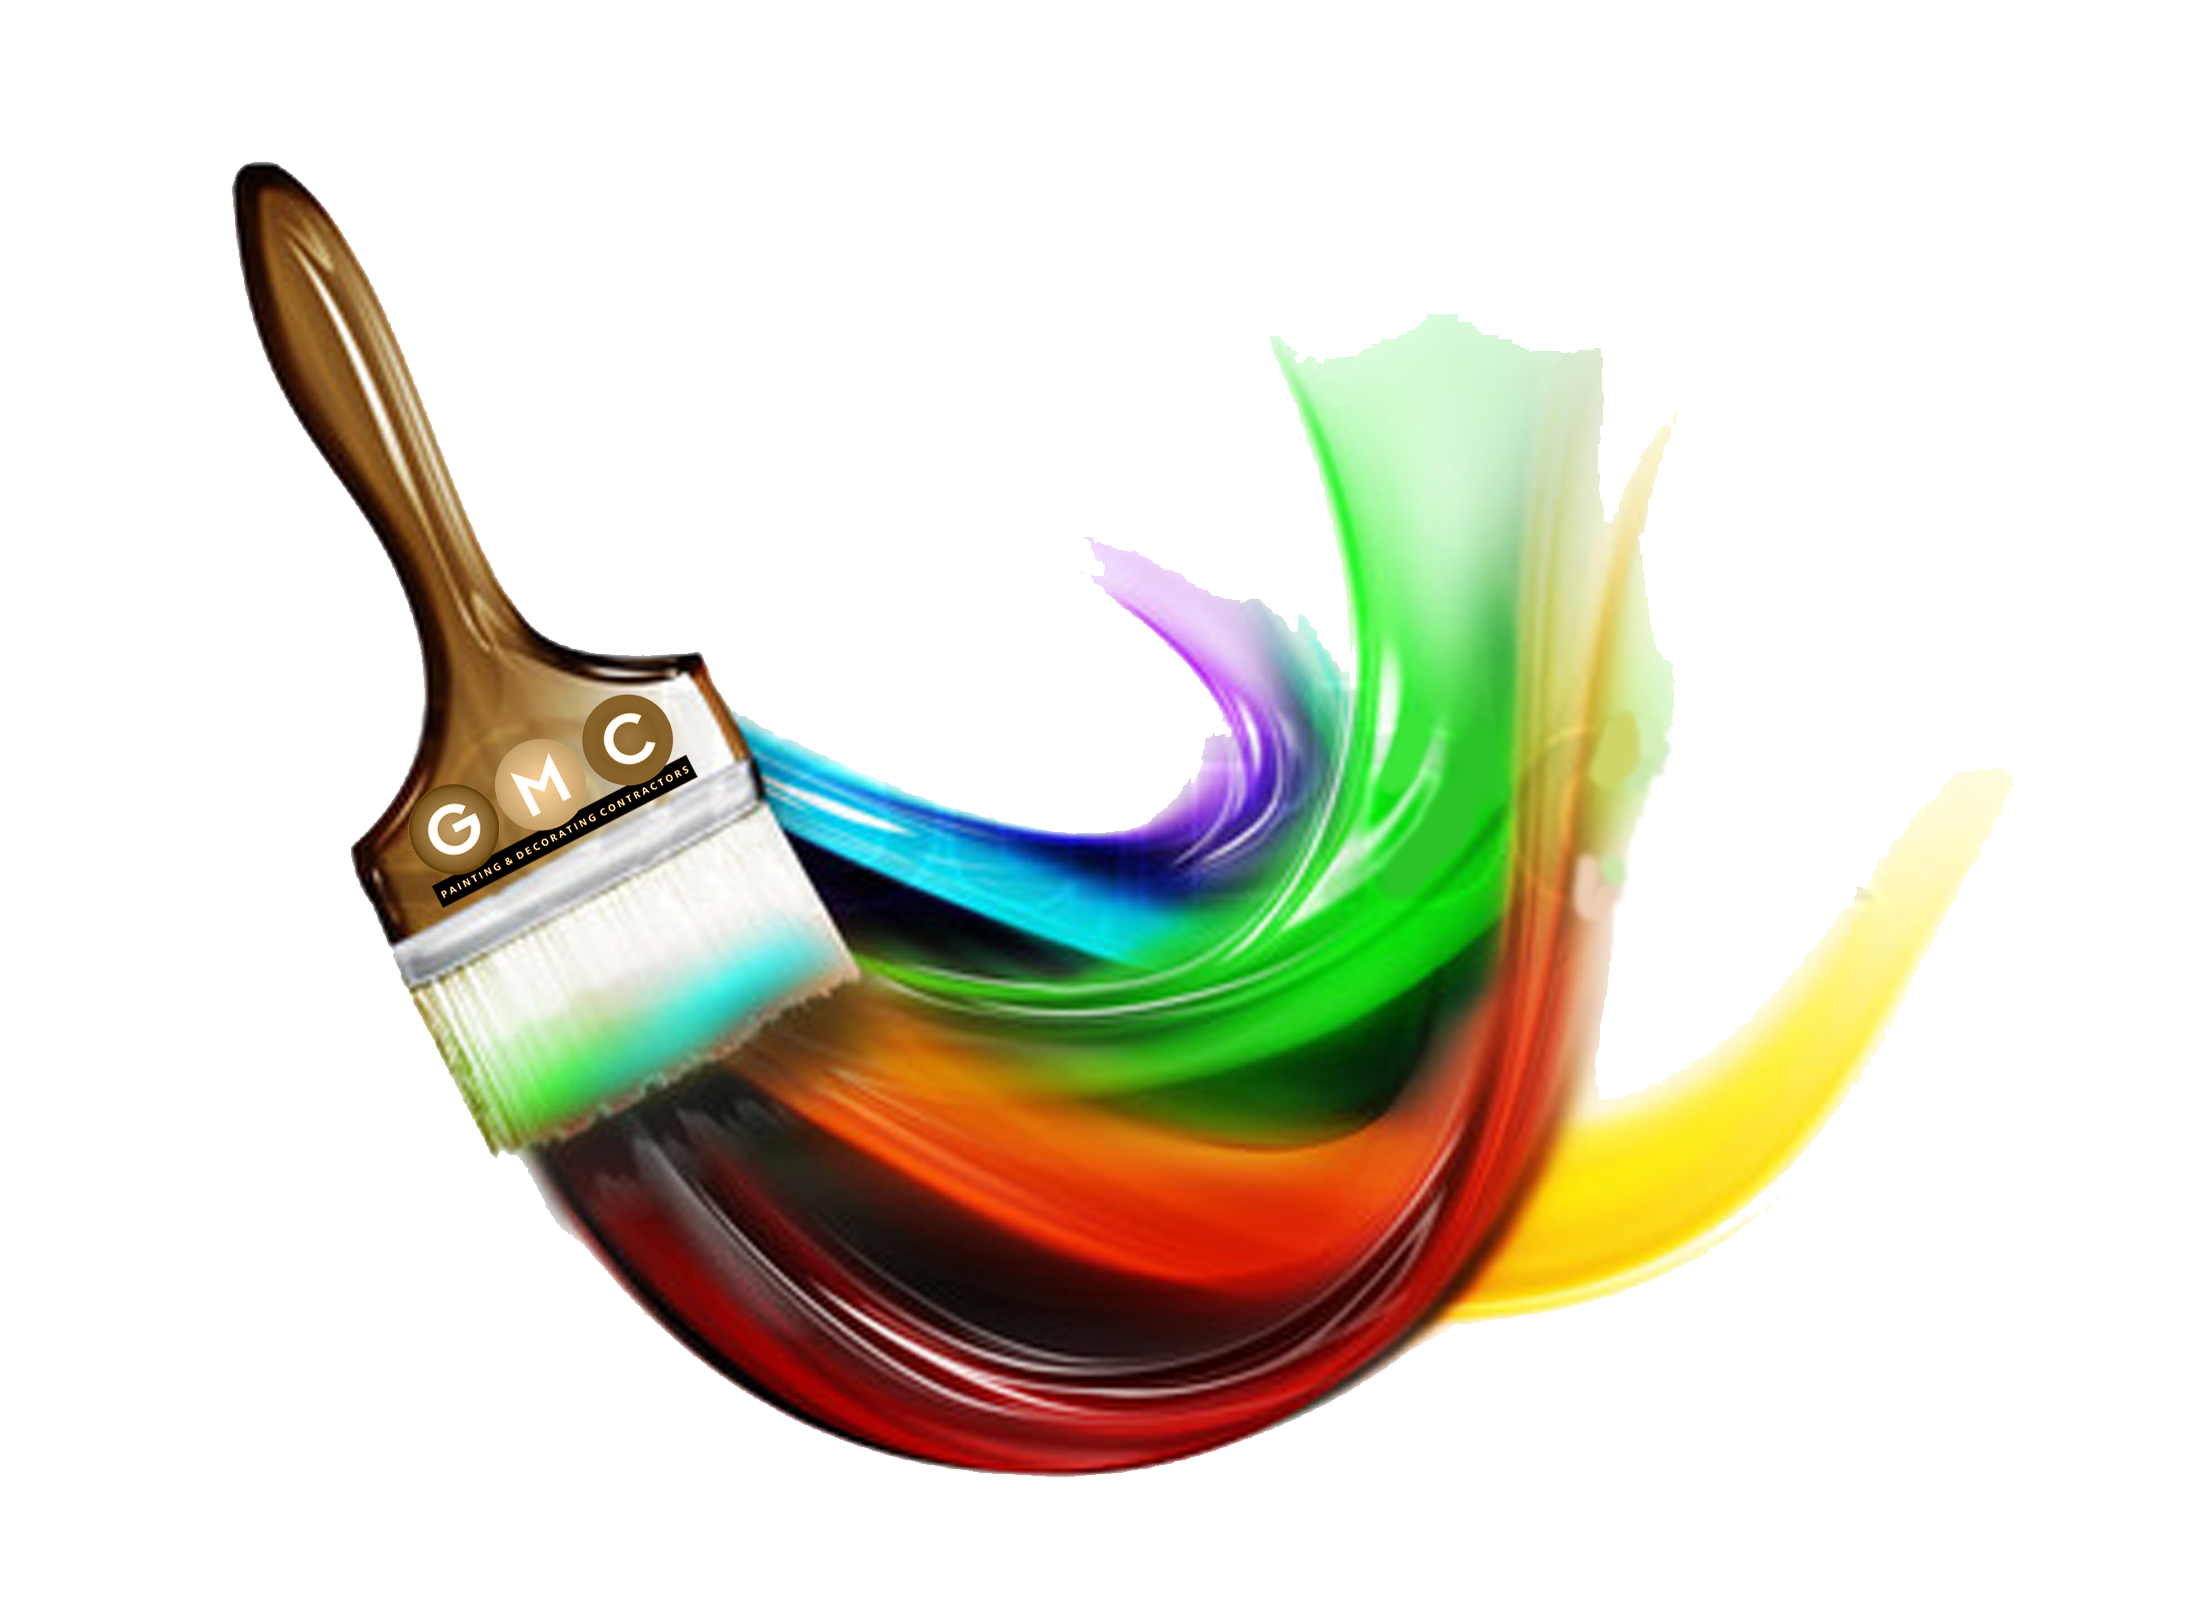 Paint Brush Stroke Png | Clipart Panda - Free Clipart Images